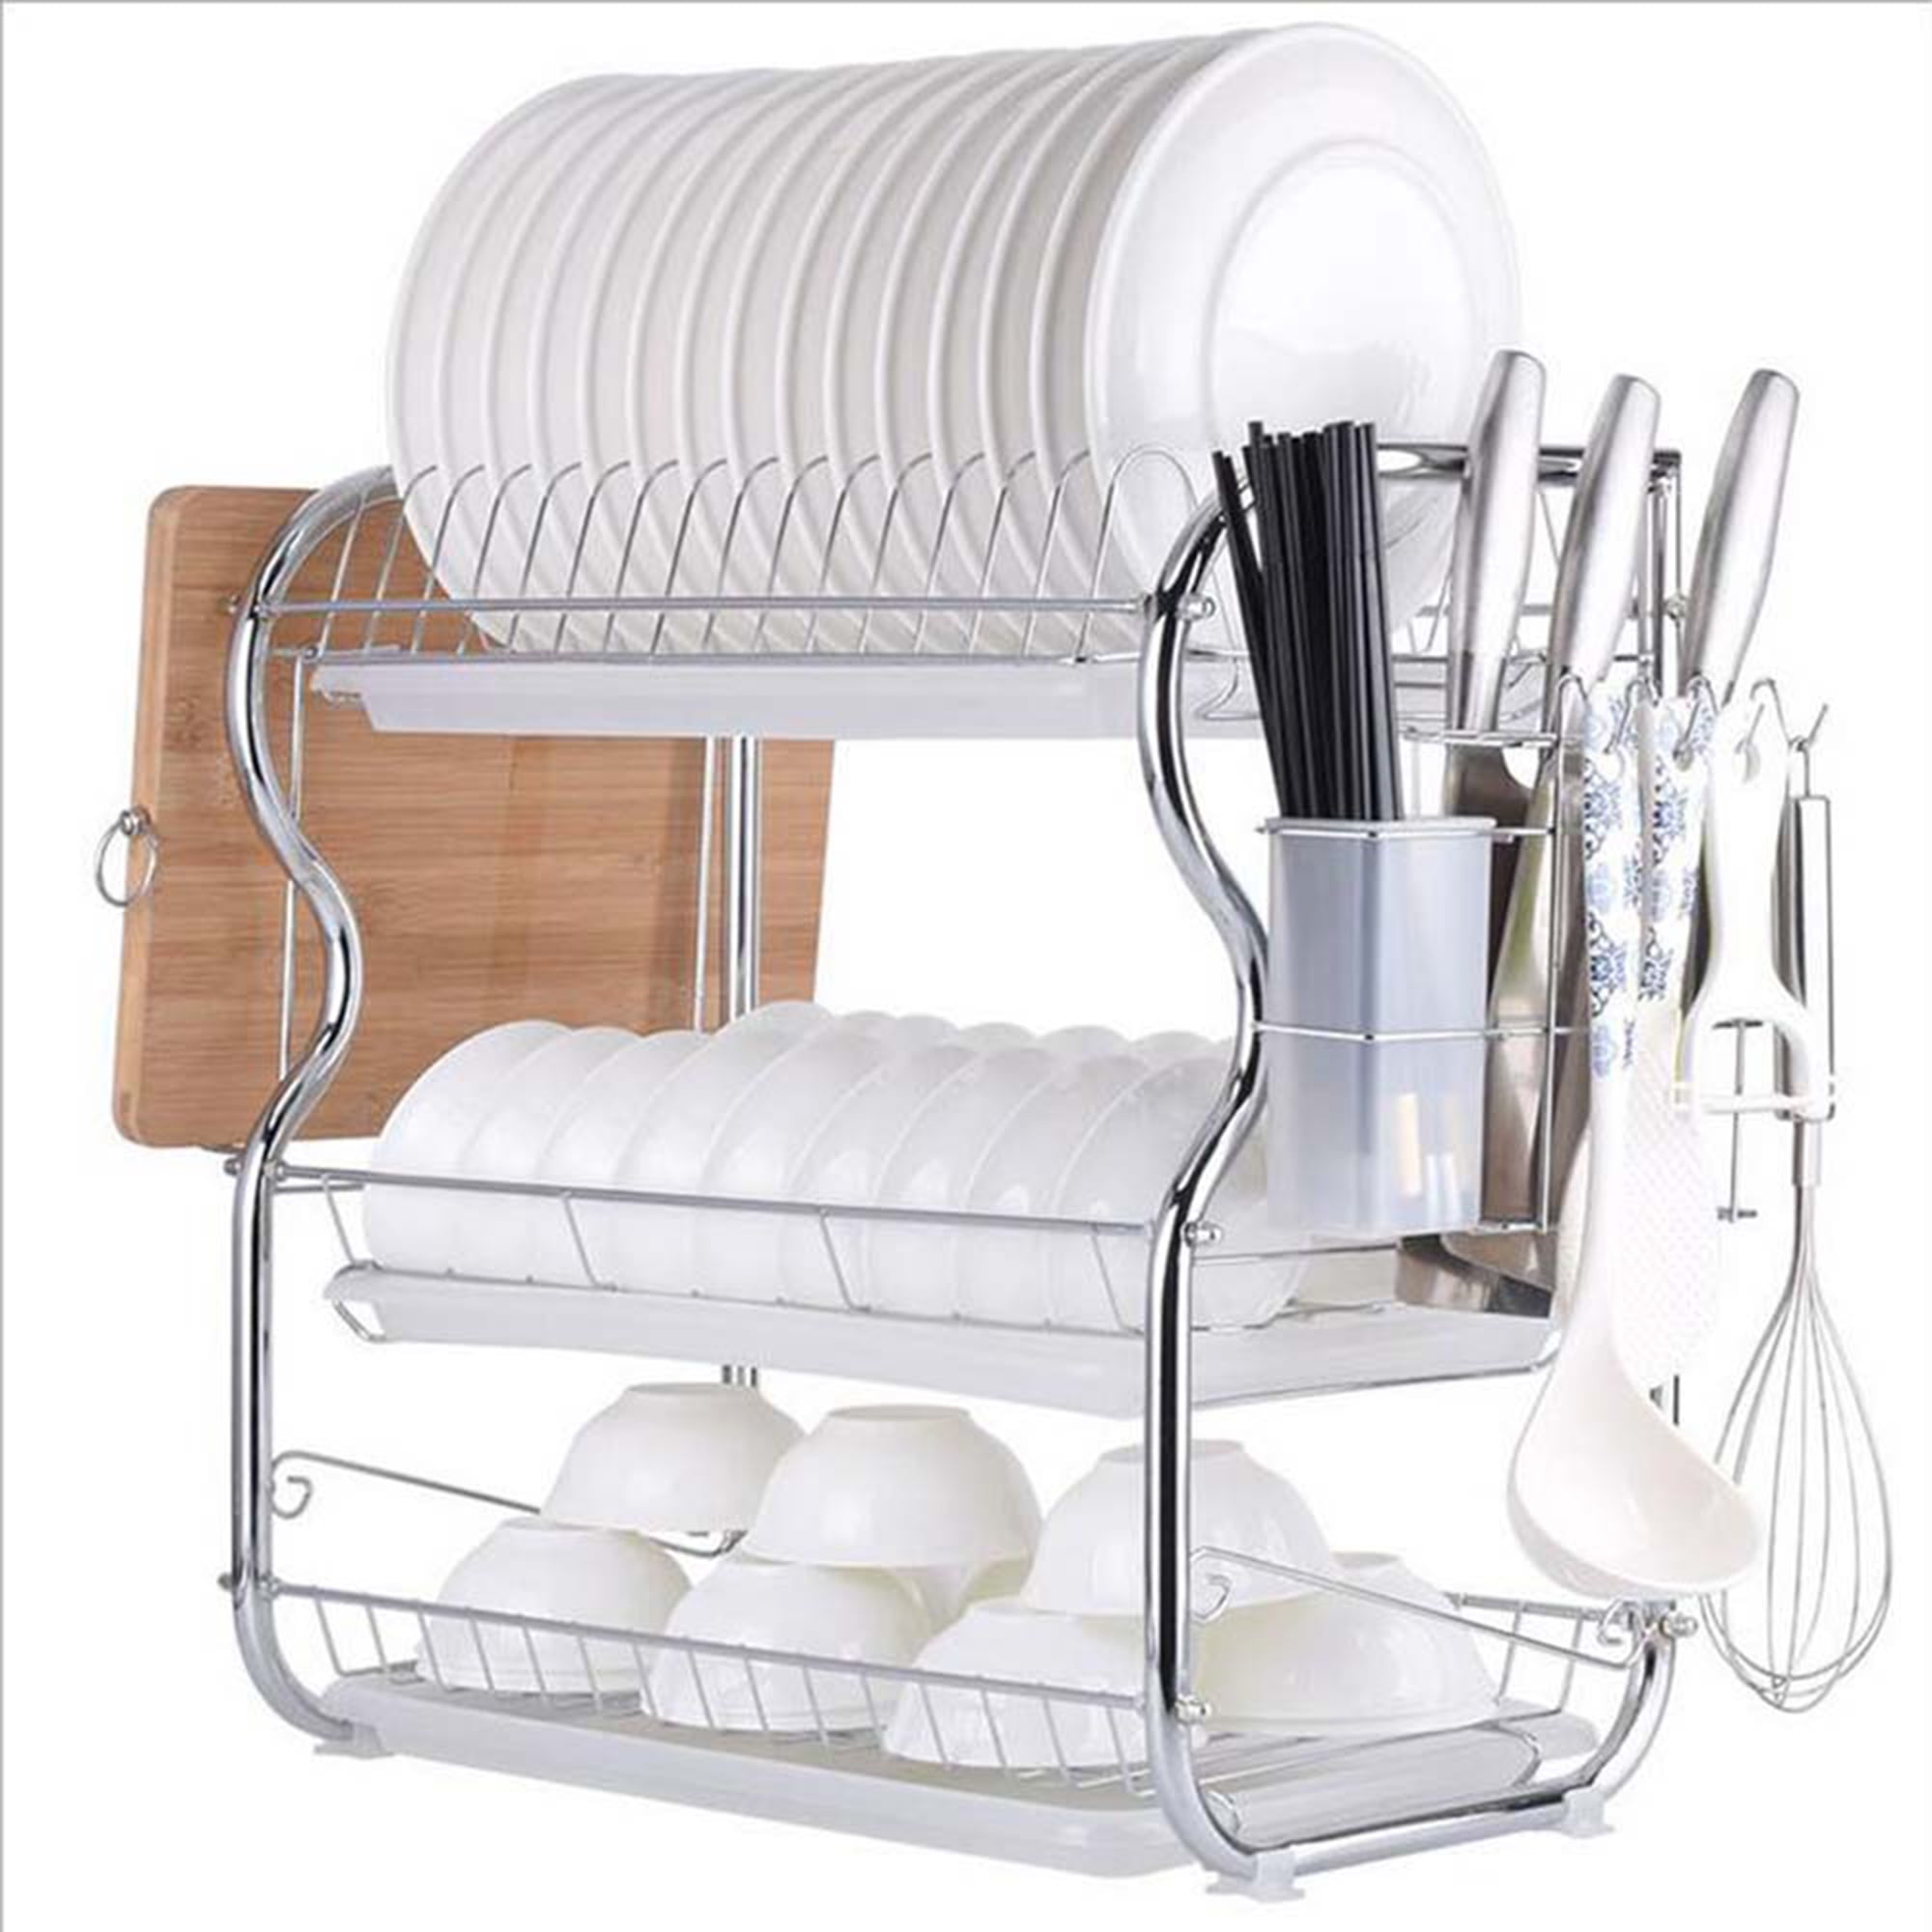 Dish Plates Cup Cutlery Crockery Glass Drainer 3 Tier Stainless Steel Rack Drip 